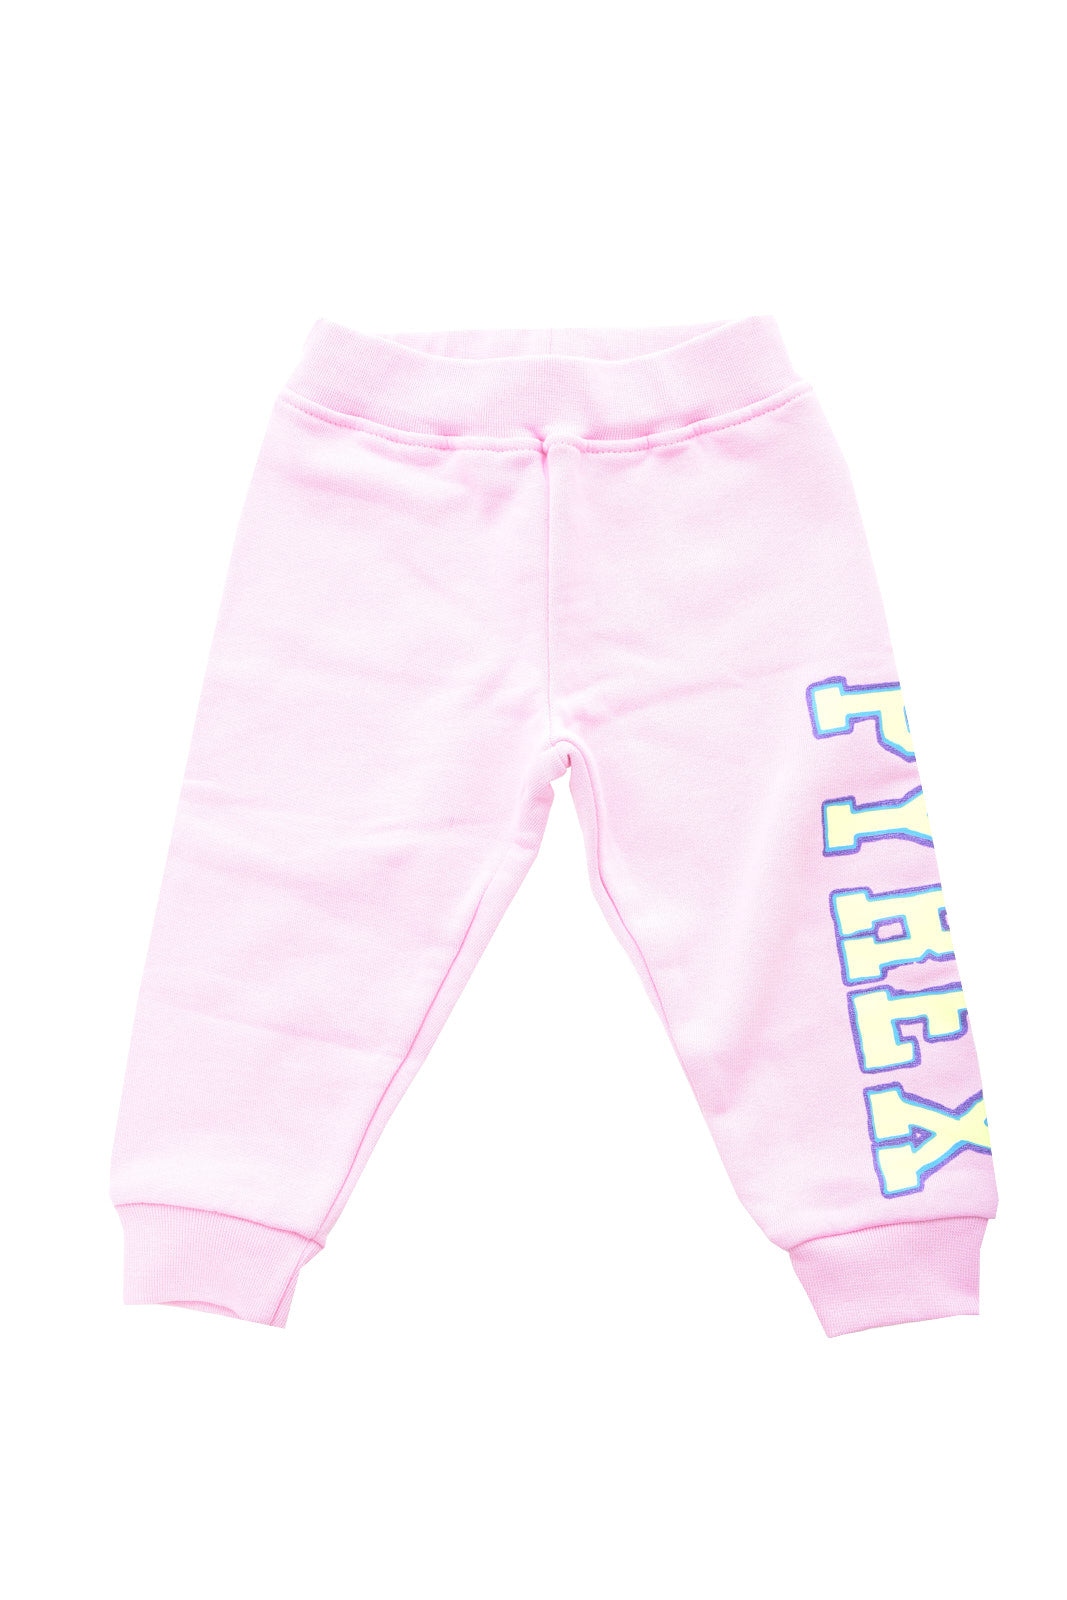 Pyrex Girl's Tracksuit Set with fluorescent prints